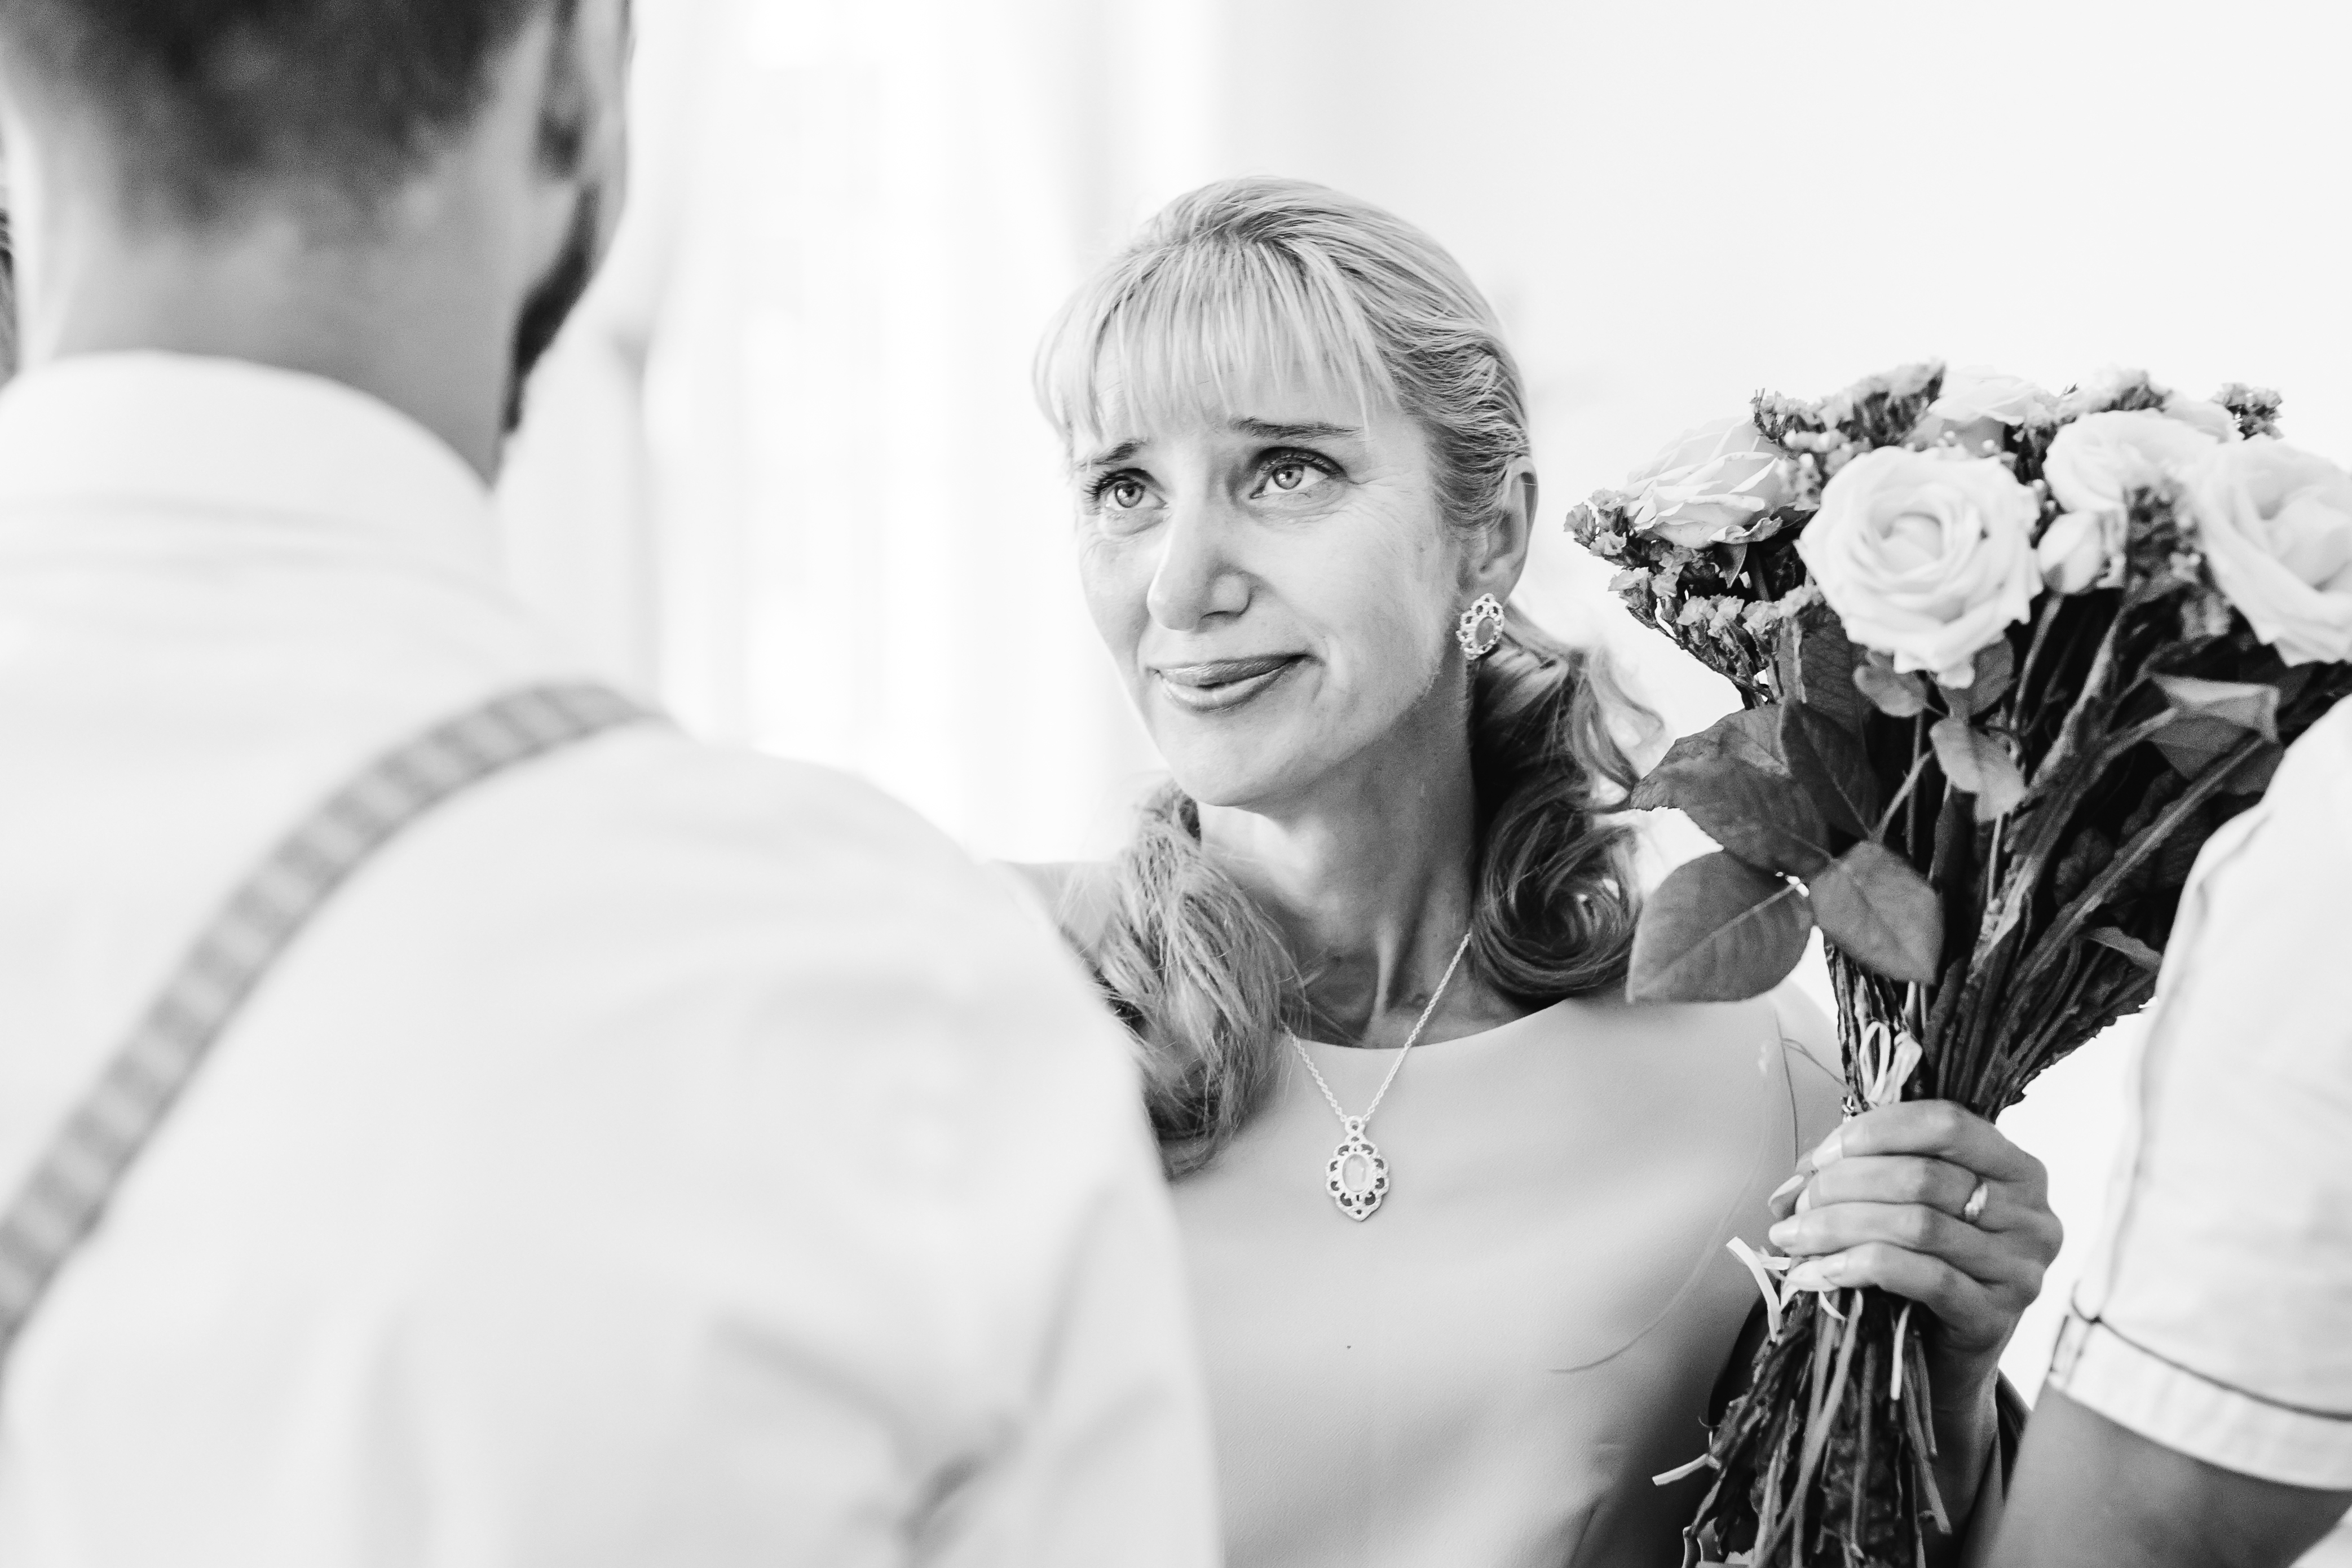 An older woman talking to a young man at a wedding | Source: Shutterstock